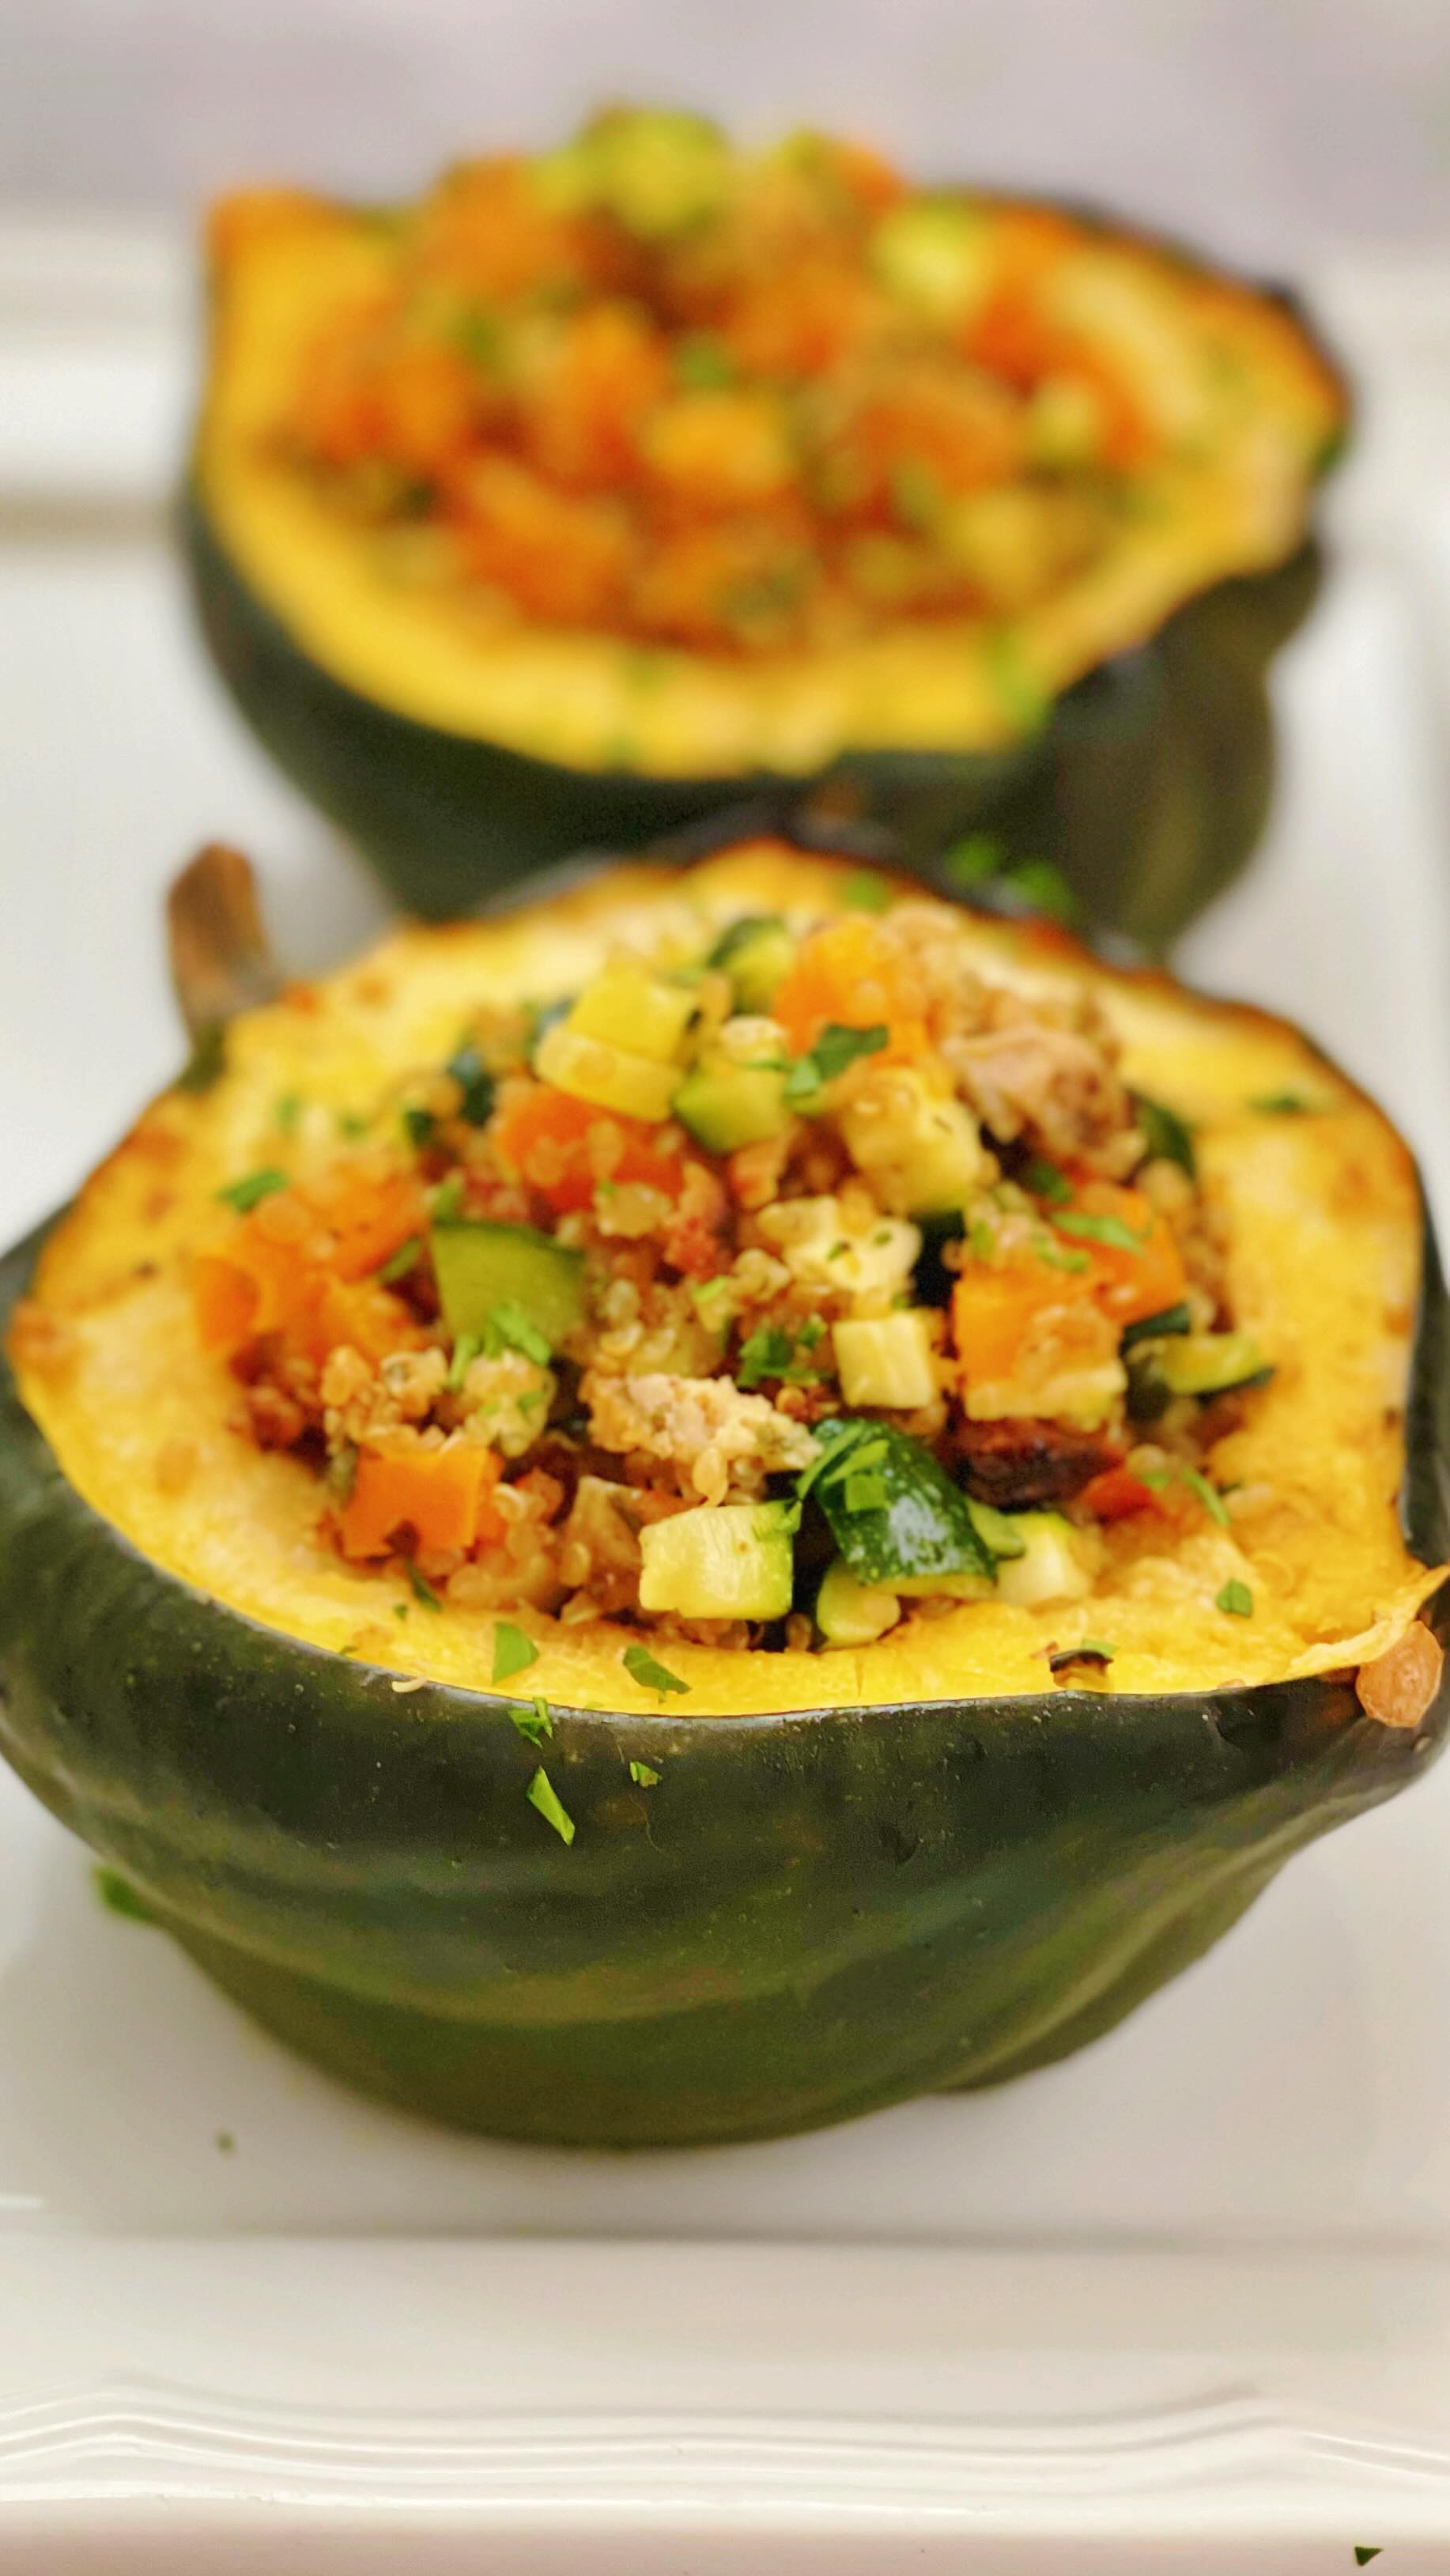 Follow @dinnerreinvented for more creative ways to stretch your dollar and reinvent your leftovers! This quinoa and turkey stuffed acorn squash recipe is a great way to use leftover meatballs, plus you can make this one dish dinner in 30 minutes! Full recipe in bio #weeknightdinner #quickmeals #quickdinner #quinoa #meatballs #acornsquash #moneysavingtips #moneysavingmeals #cheapeats #foodblogger #momblogger #dinnerideas #feedfeed #food52 #foodreels #dinnerreinvented